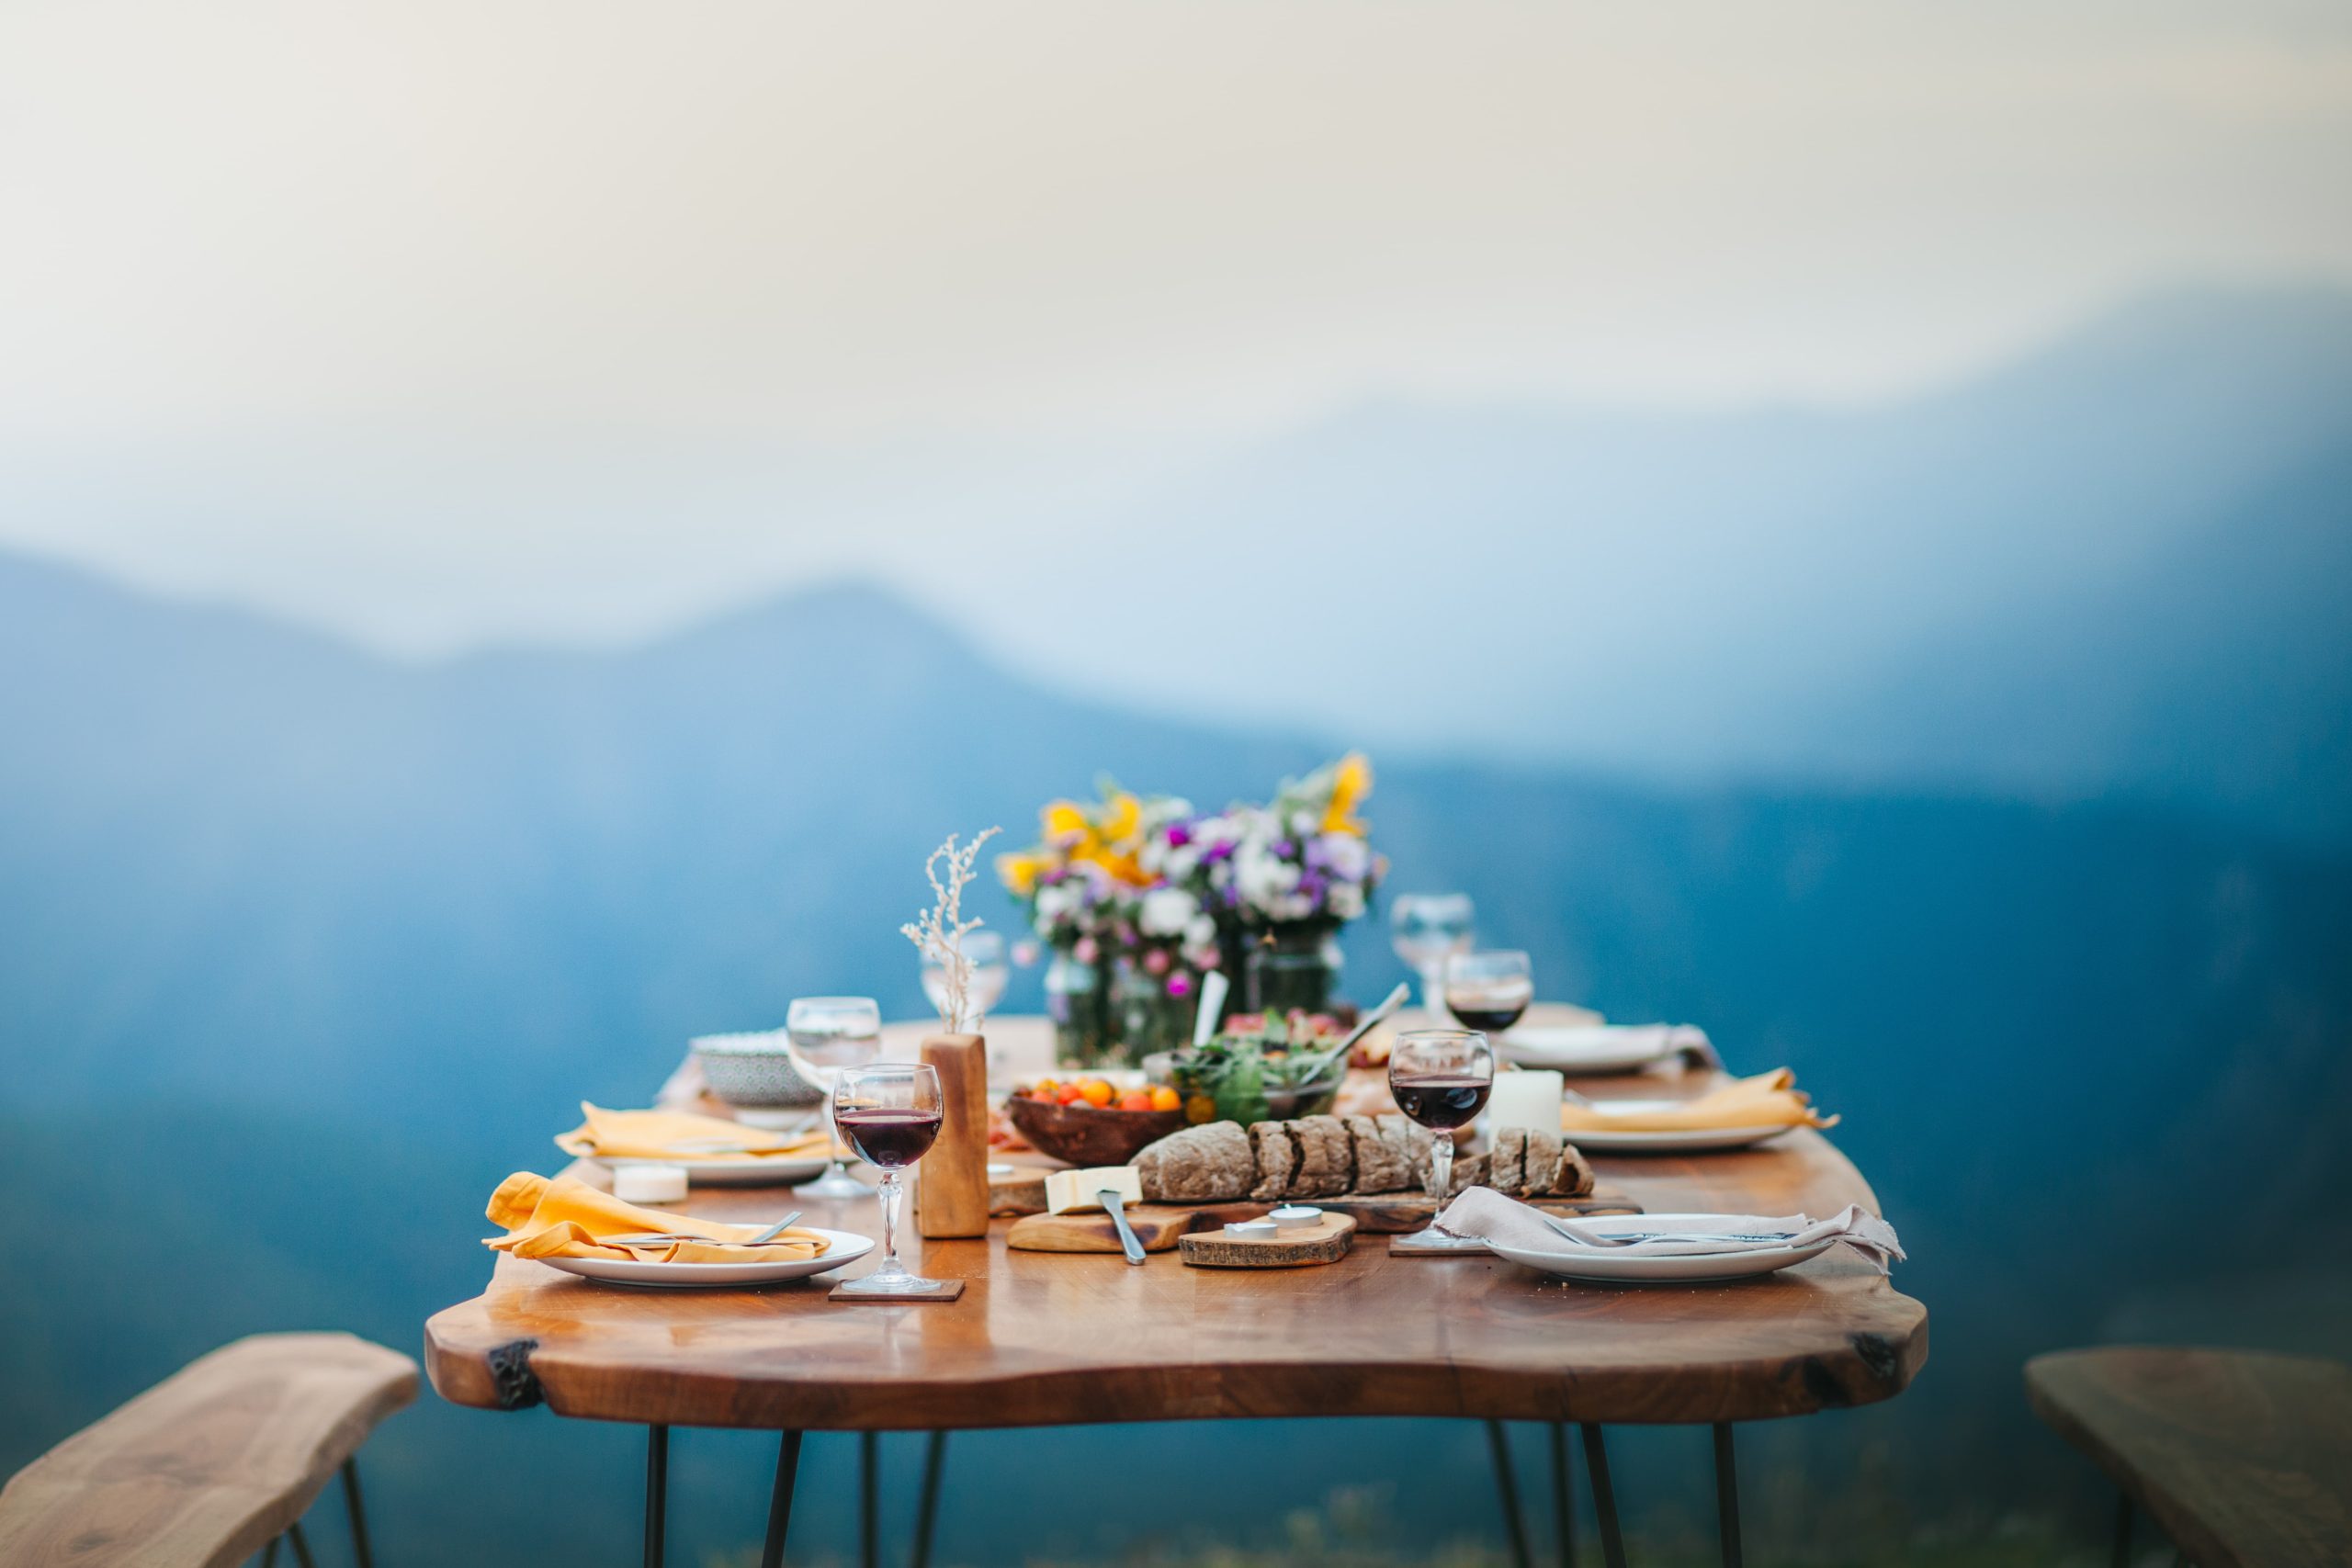 Al Fresco Meal on table looking out on scenic mountain view